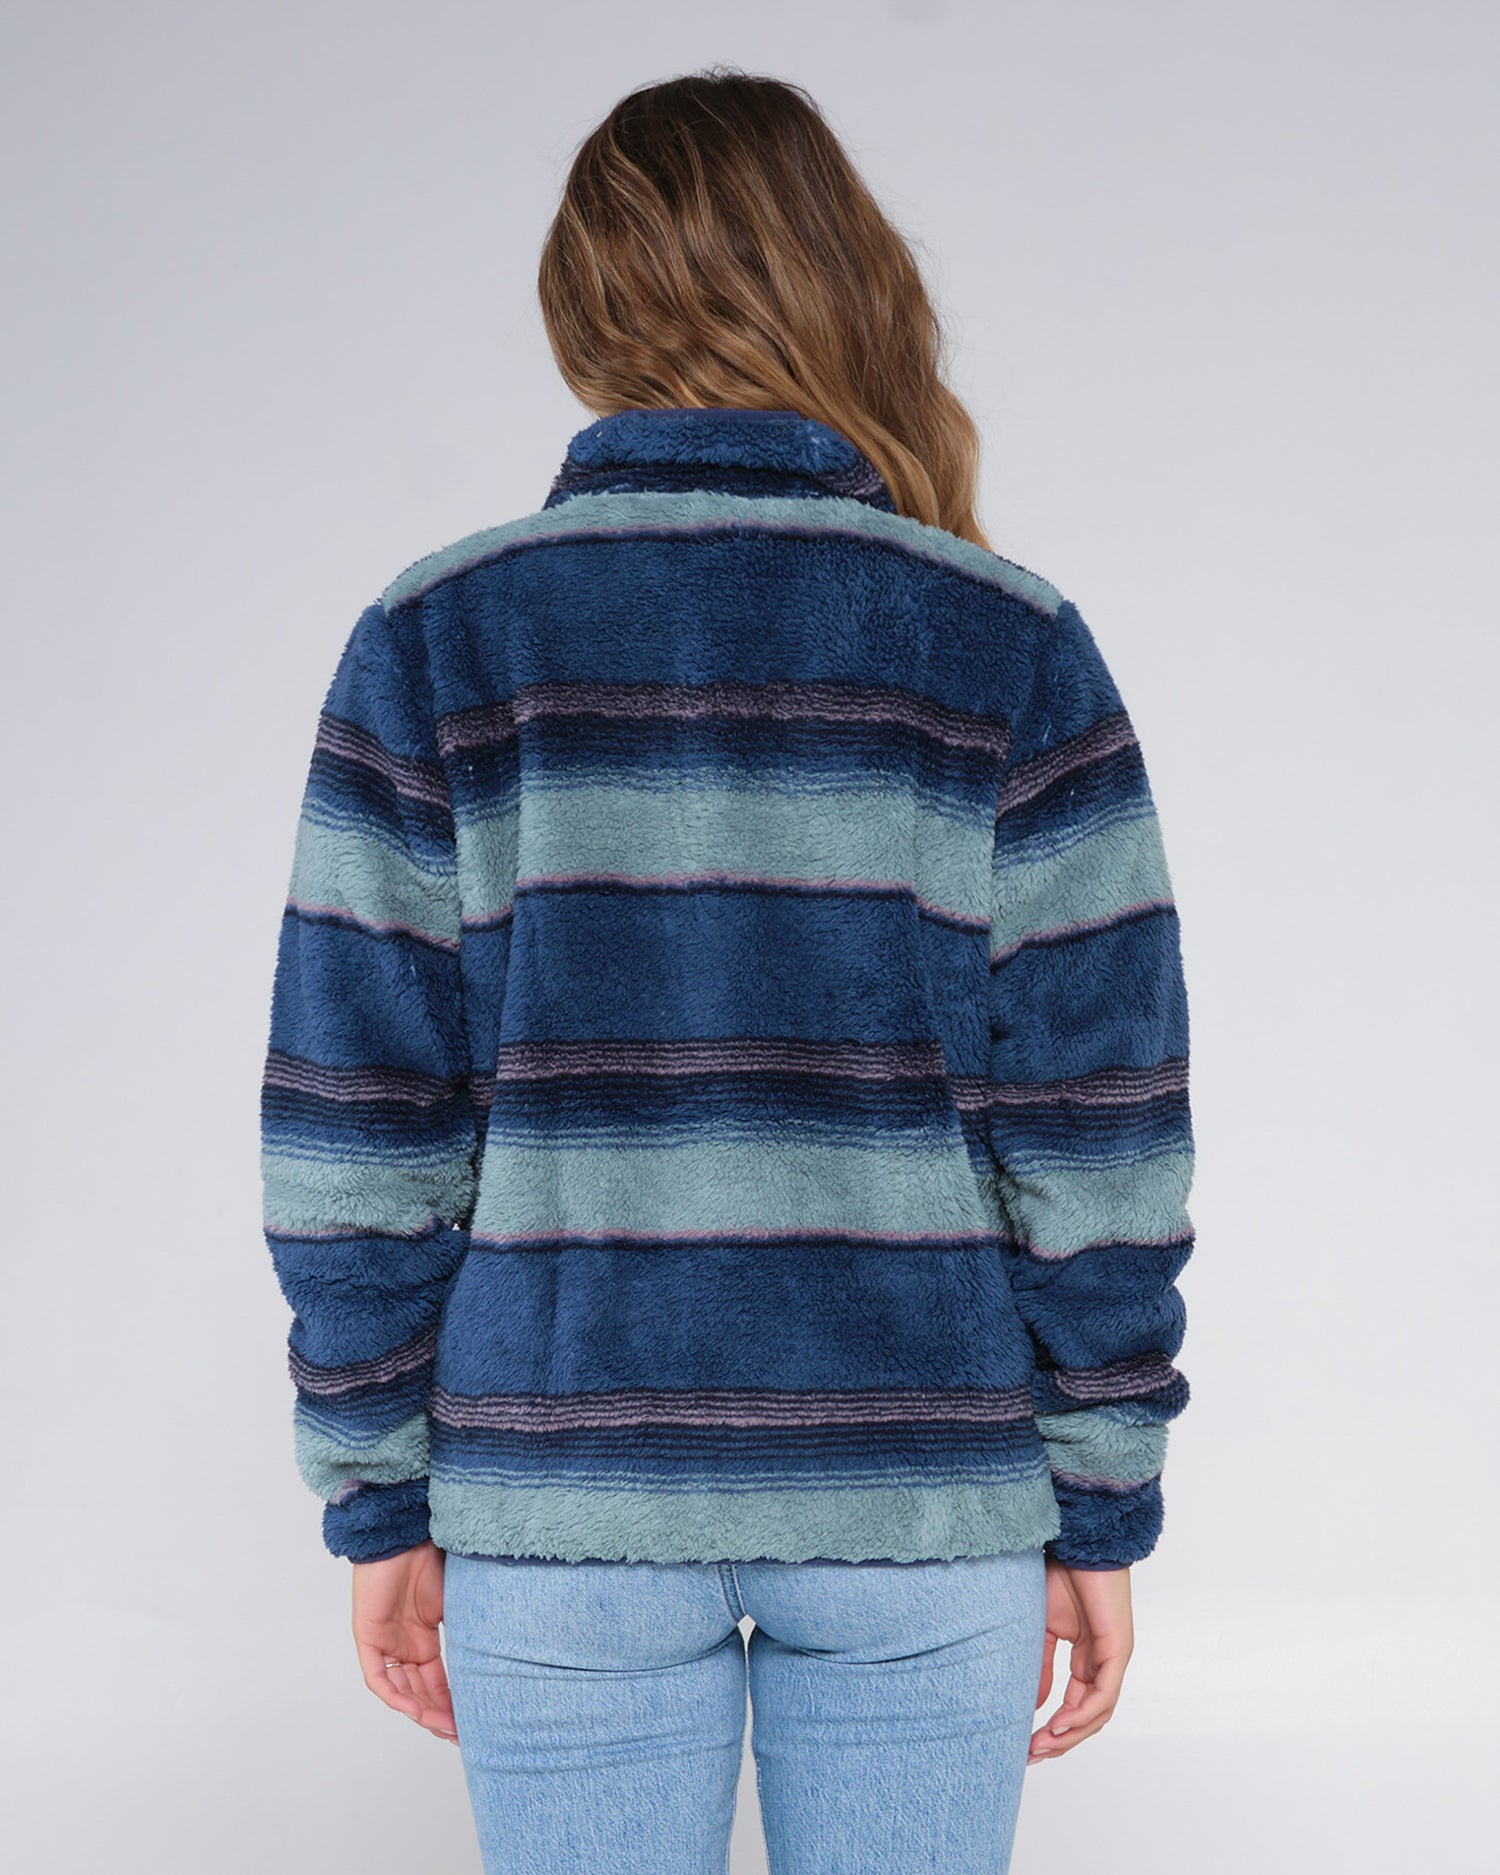 On body back of the Calm Seas Blue Steel Pullover